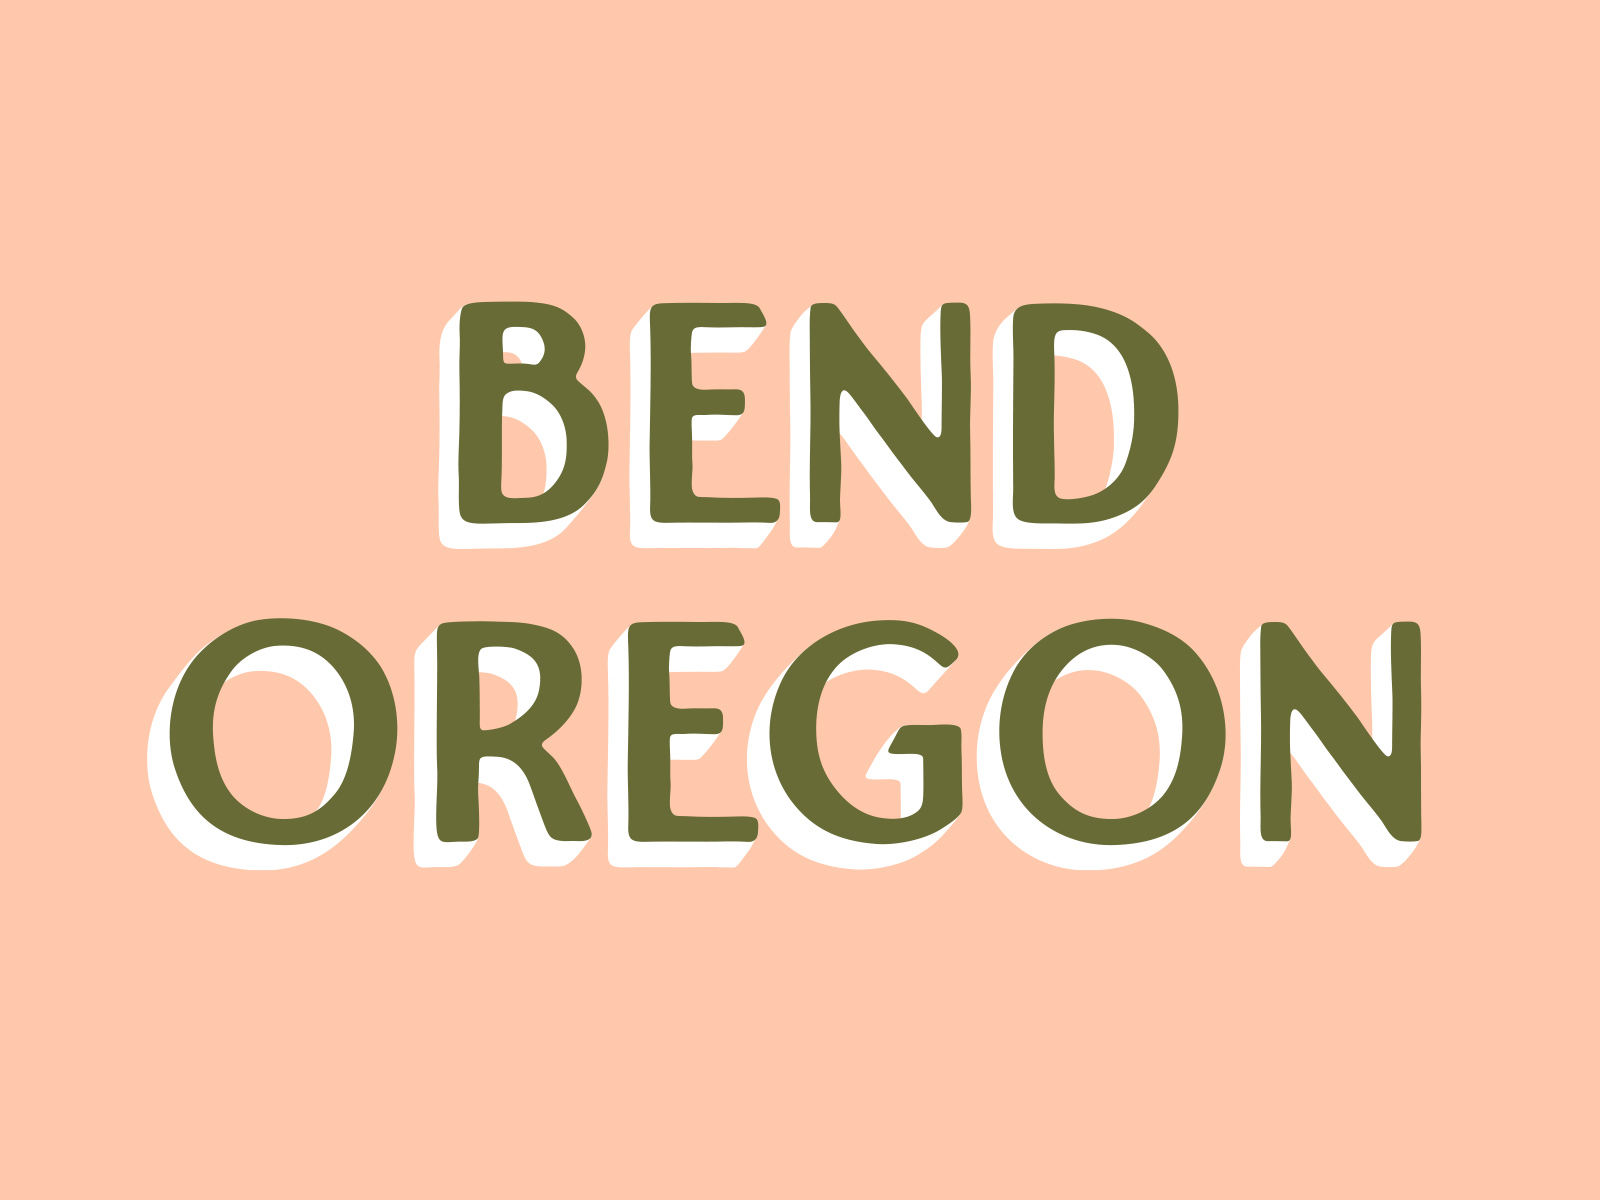 Shadow Lettering reading "Bend Oregon"